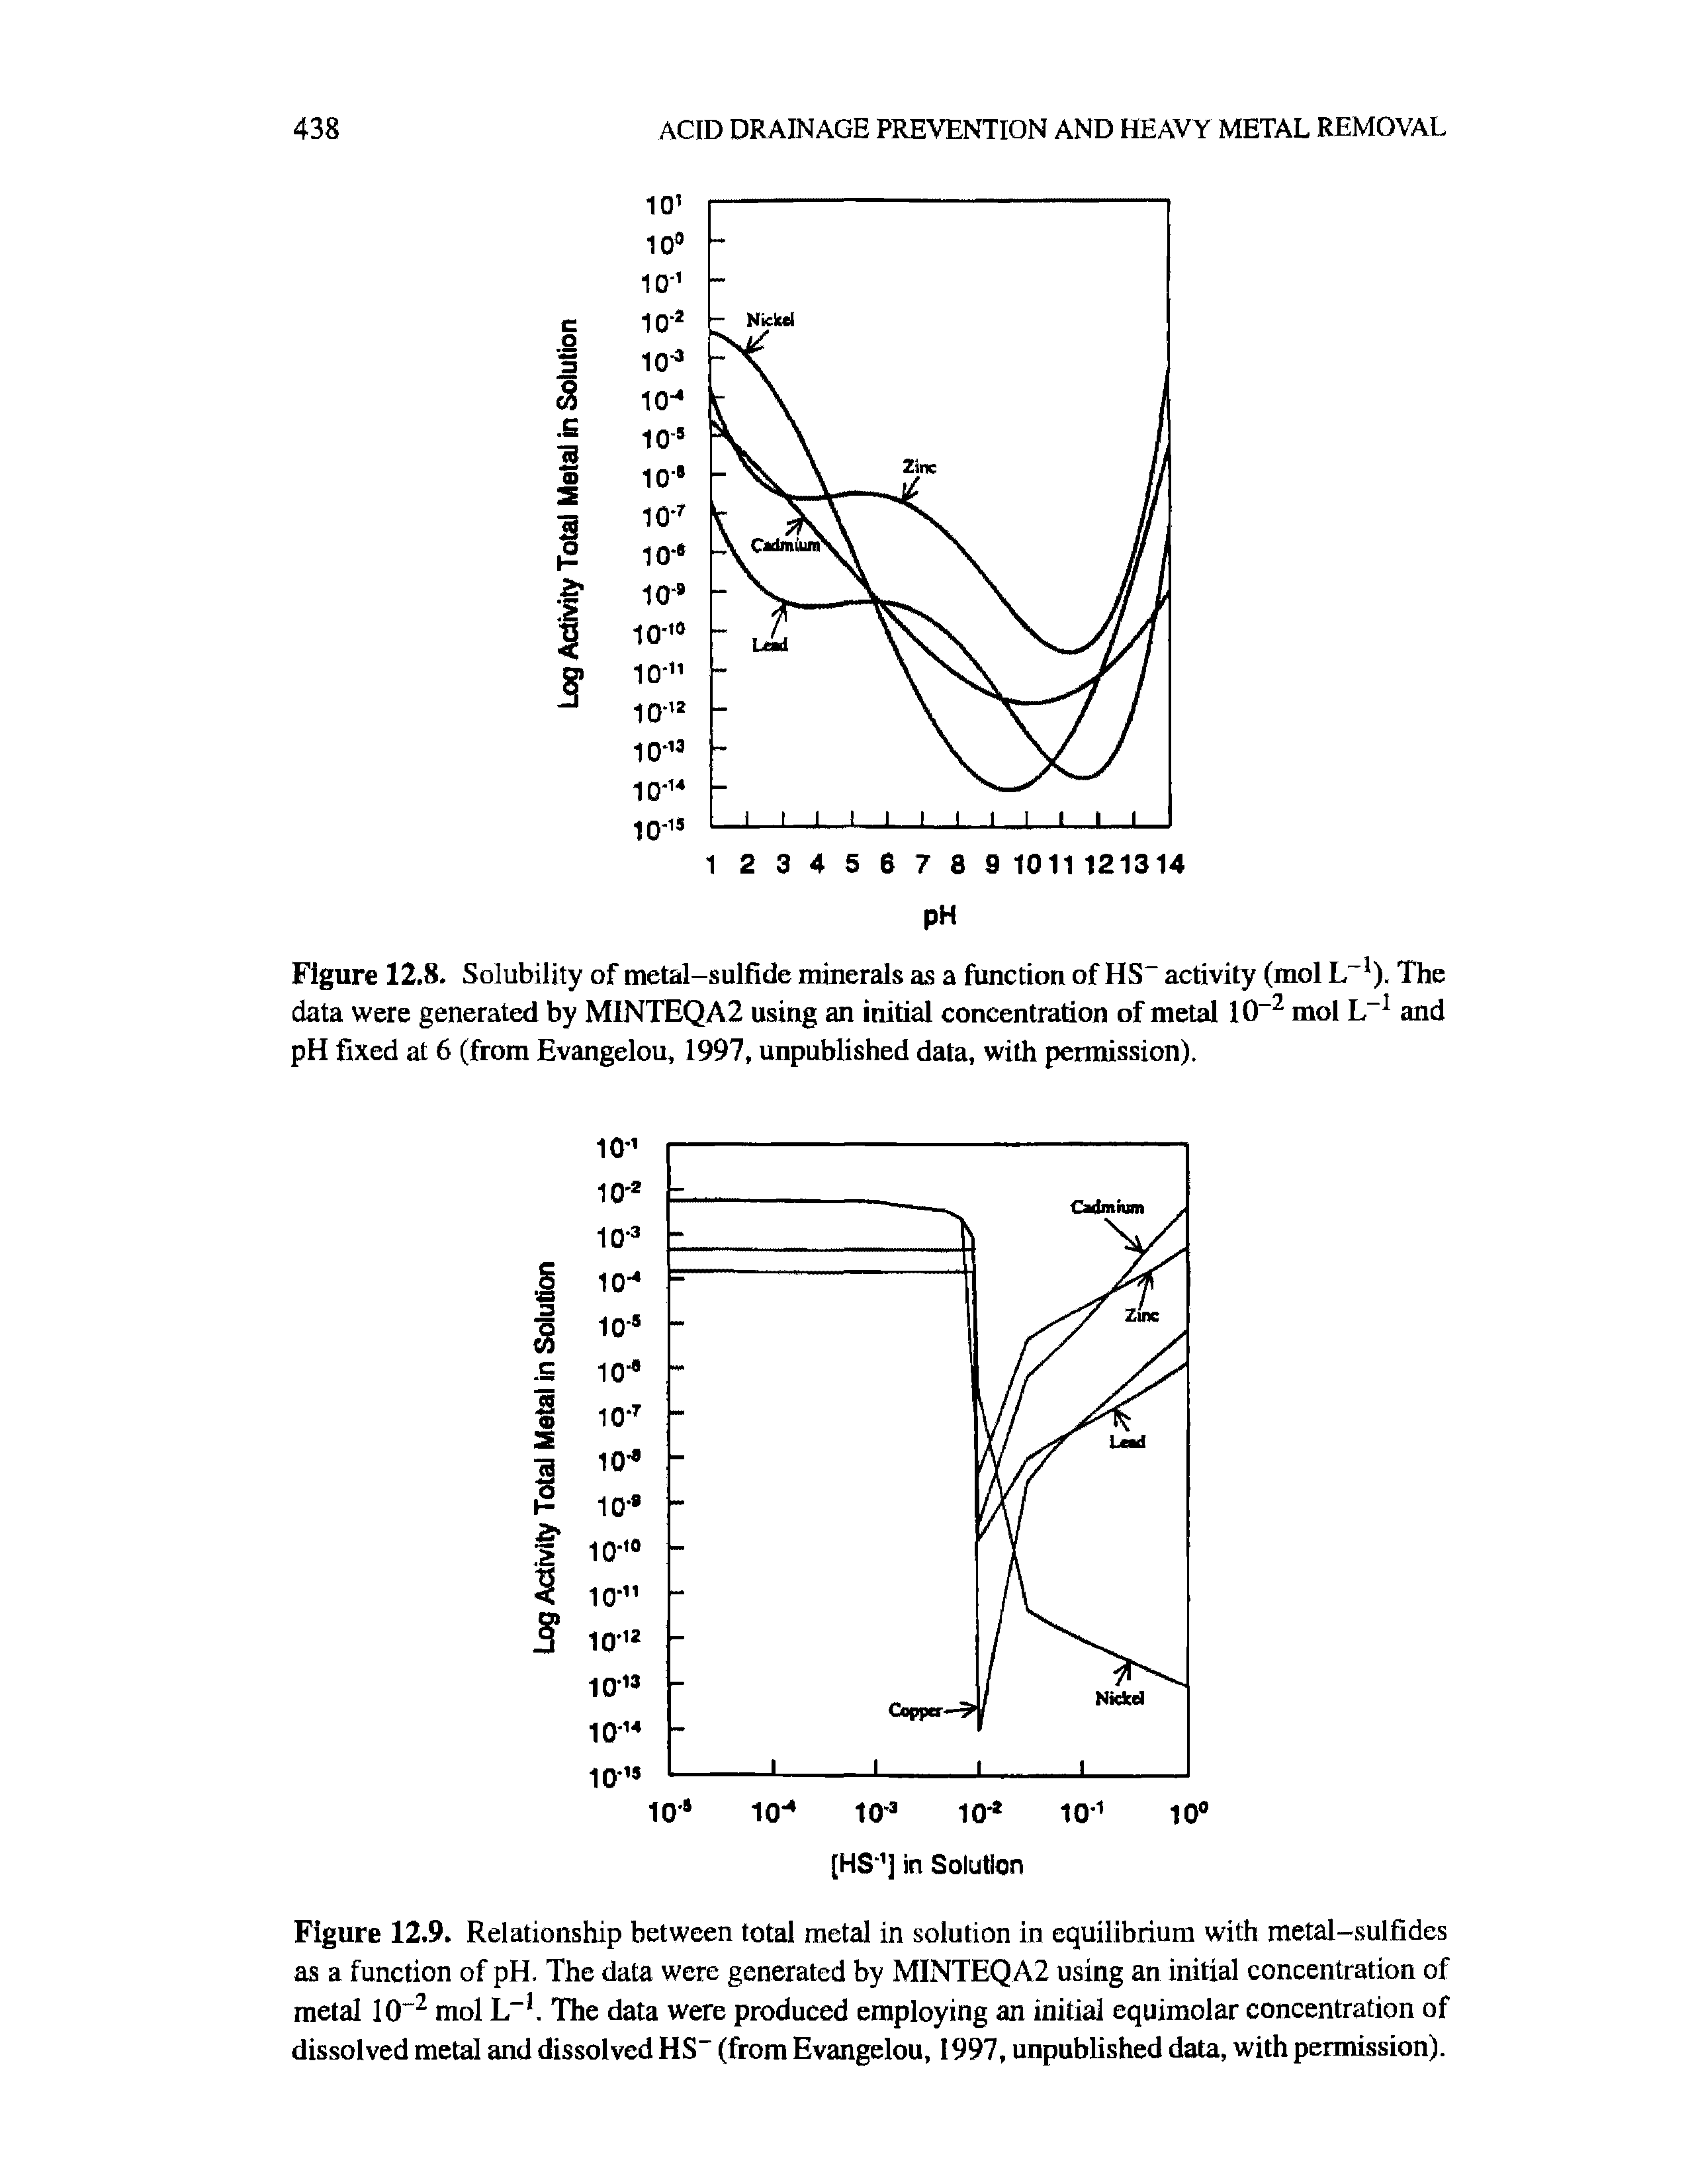 Figure 12.9. Relationship between total metal in solution in equilibrium with metal-sulfides as a function of pH. The data were generated by MINTEQA2 using an initial concentration of metal 10 2 mol L-1. The data were produced employing an initial equimolar concentration of dissolved metal and dissolved HS- (from Evangelou, 1997, unpublished data, with permission).